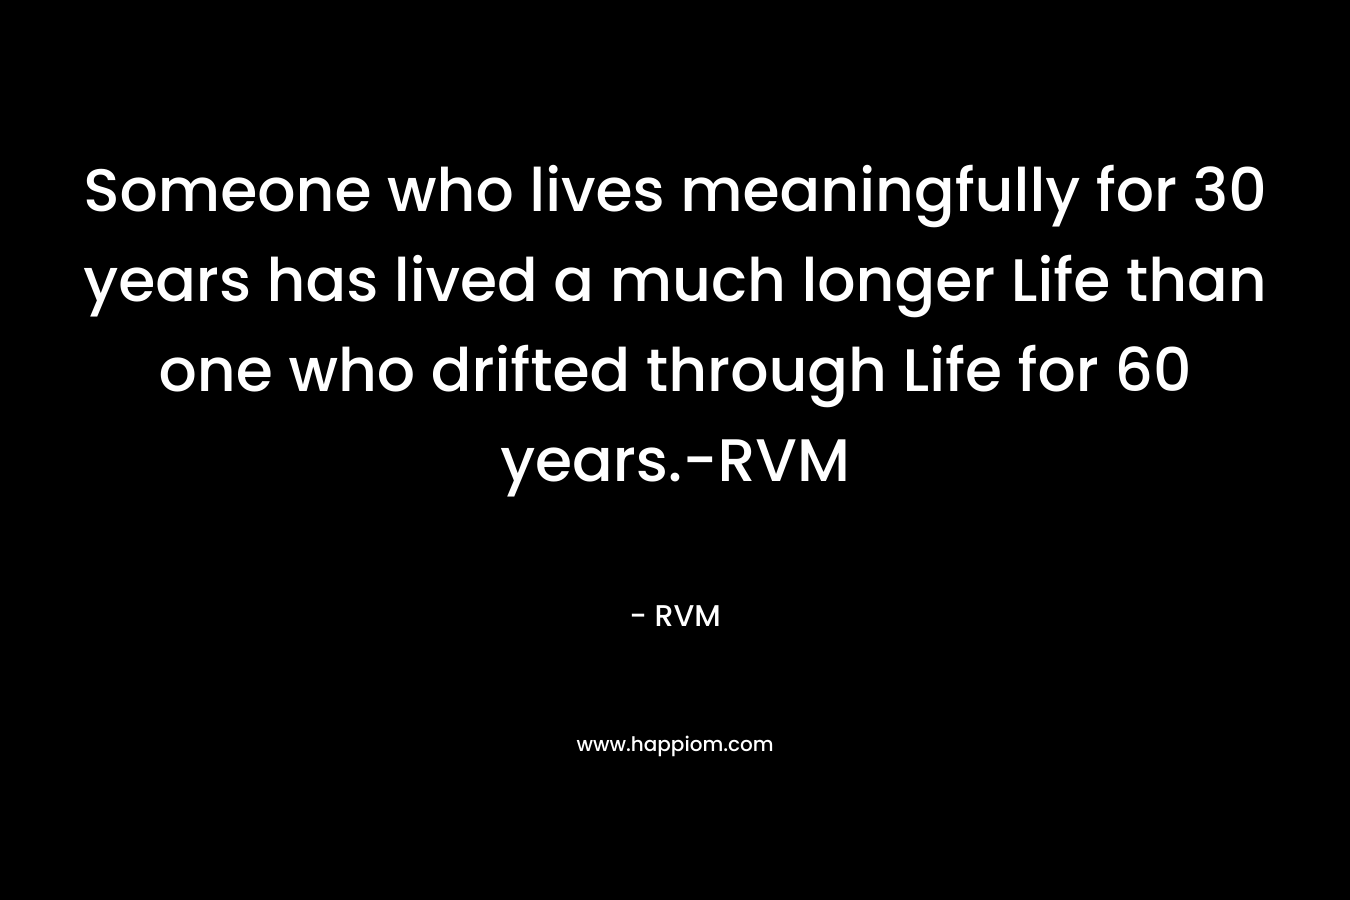 Someone who lives meaningfully for 30 years has lived a much longer Life than one who drifted through Life for 60 years.-RVM